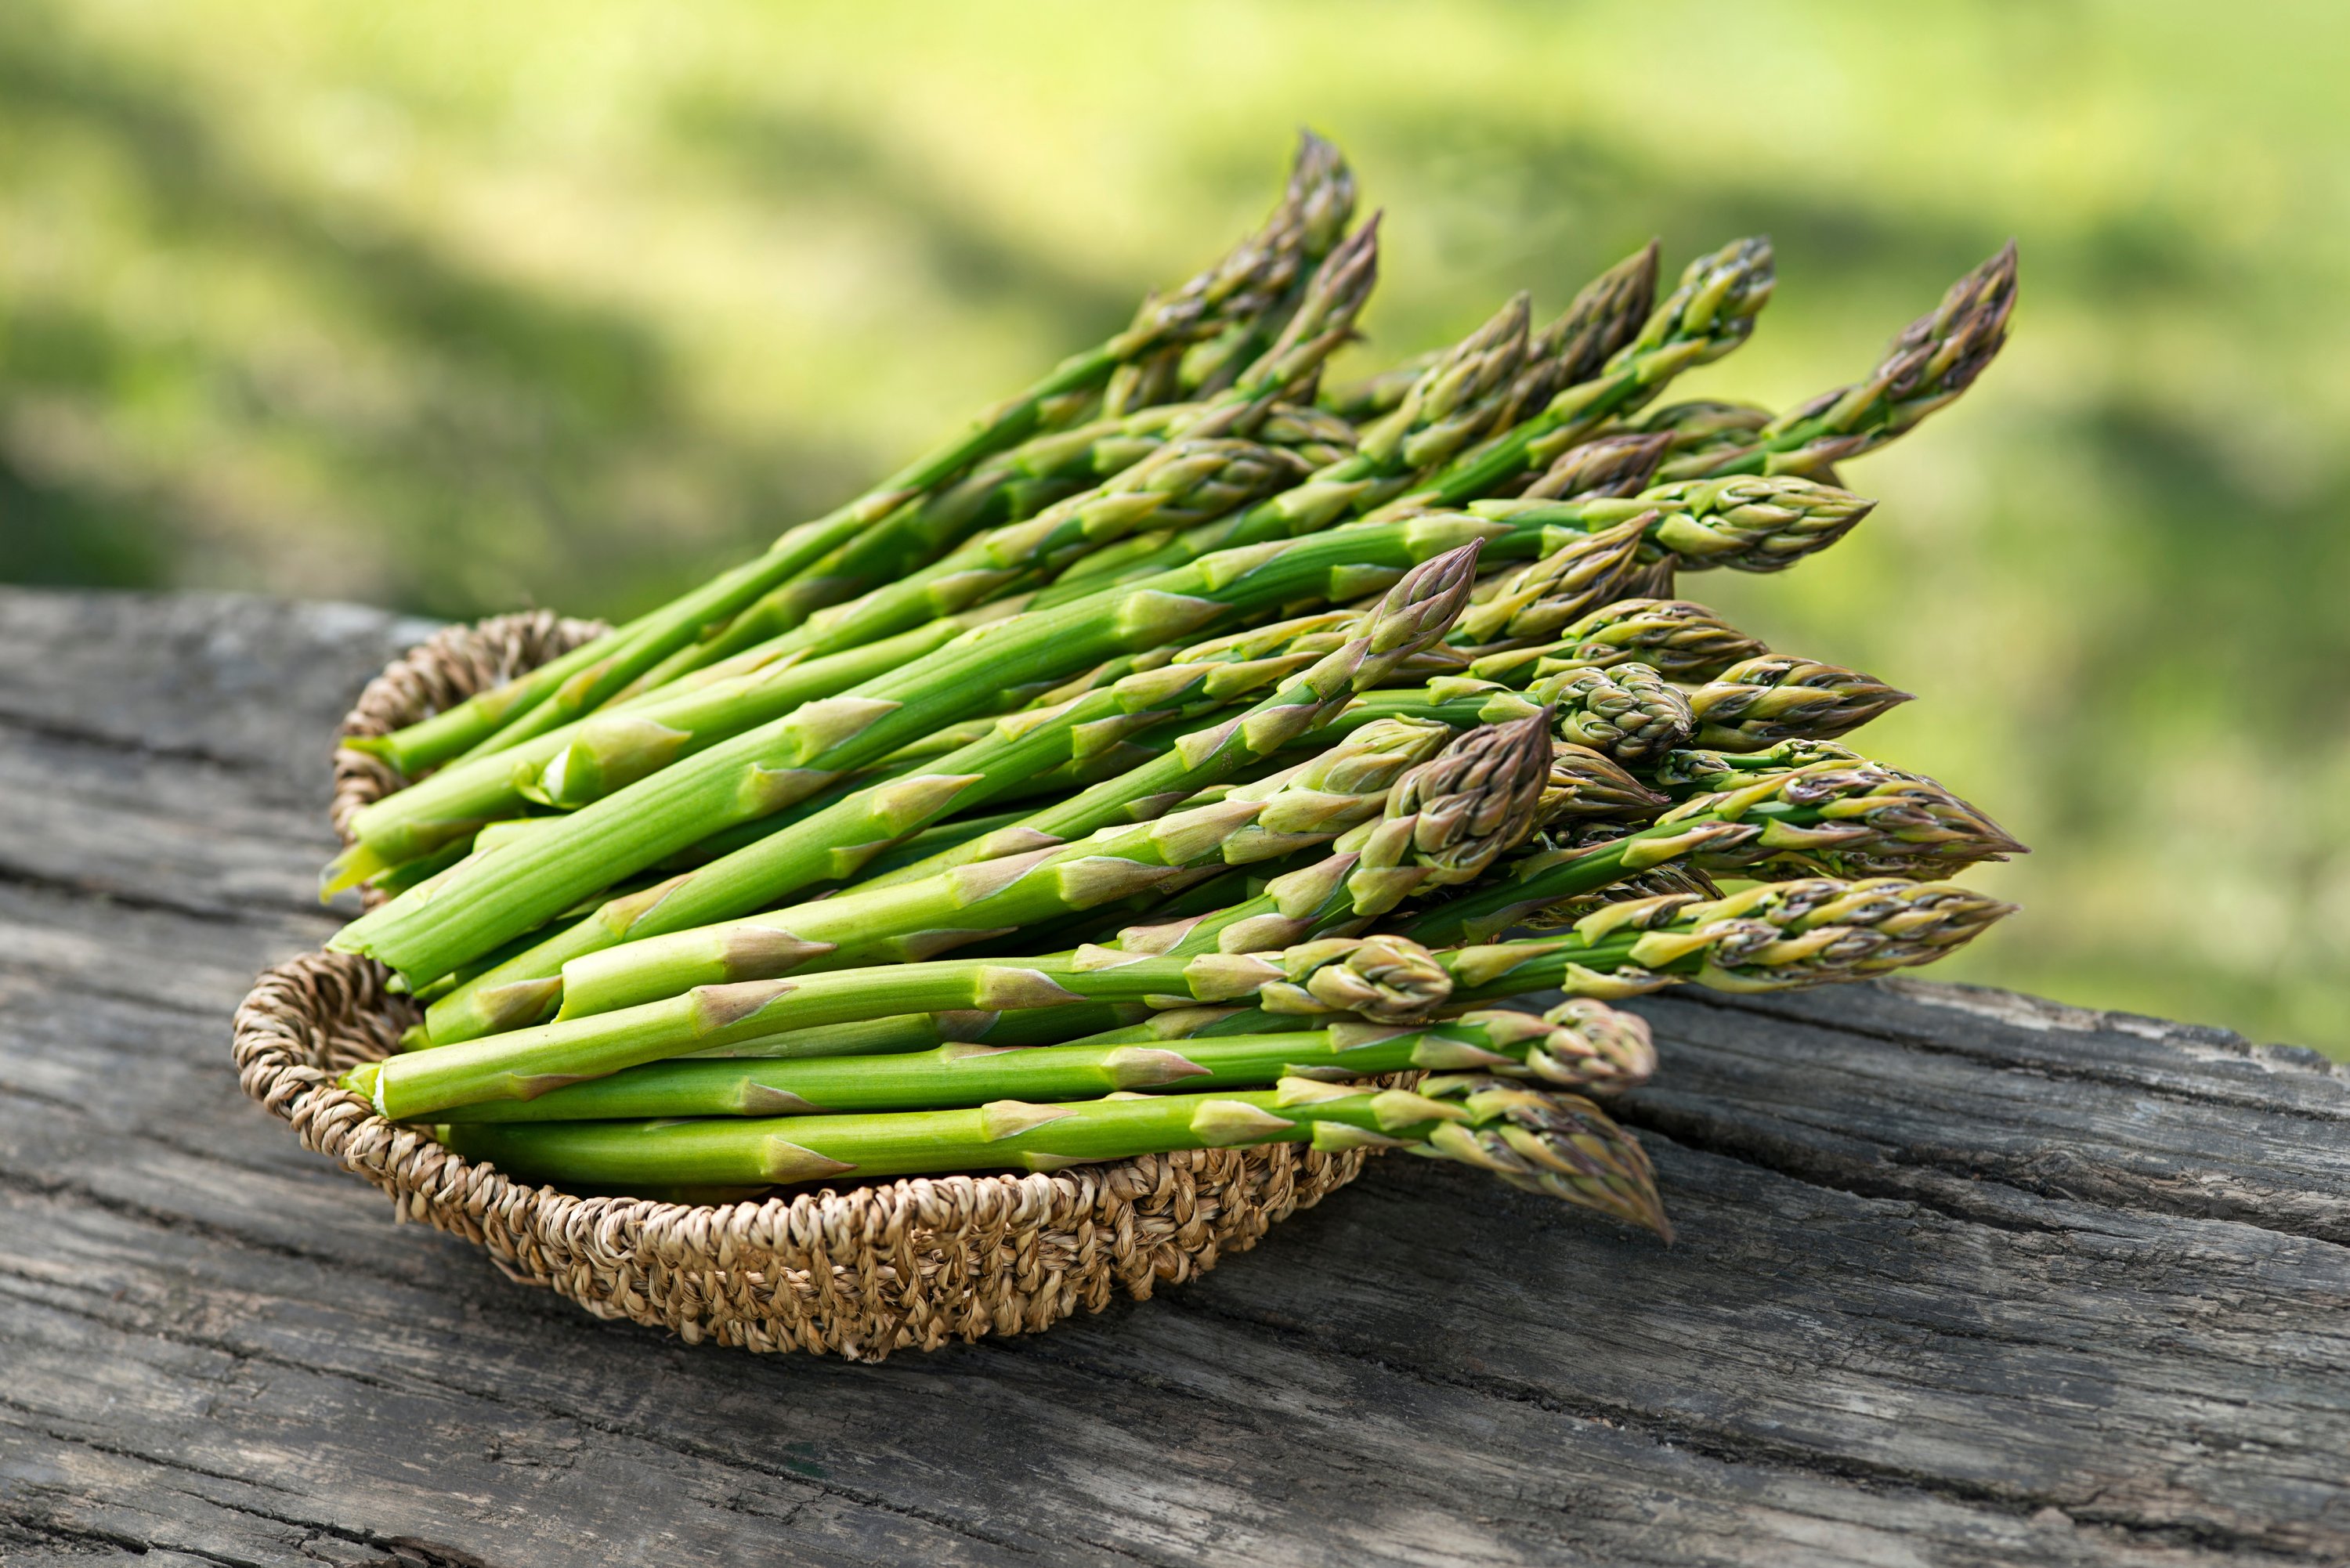 Vegetable power: Why asparagus will fill you up like nothing else | Daily Sabah